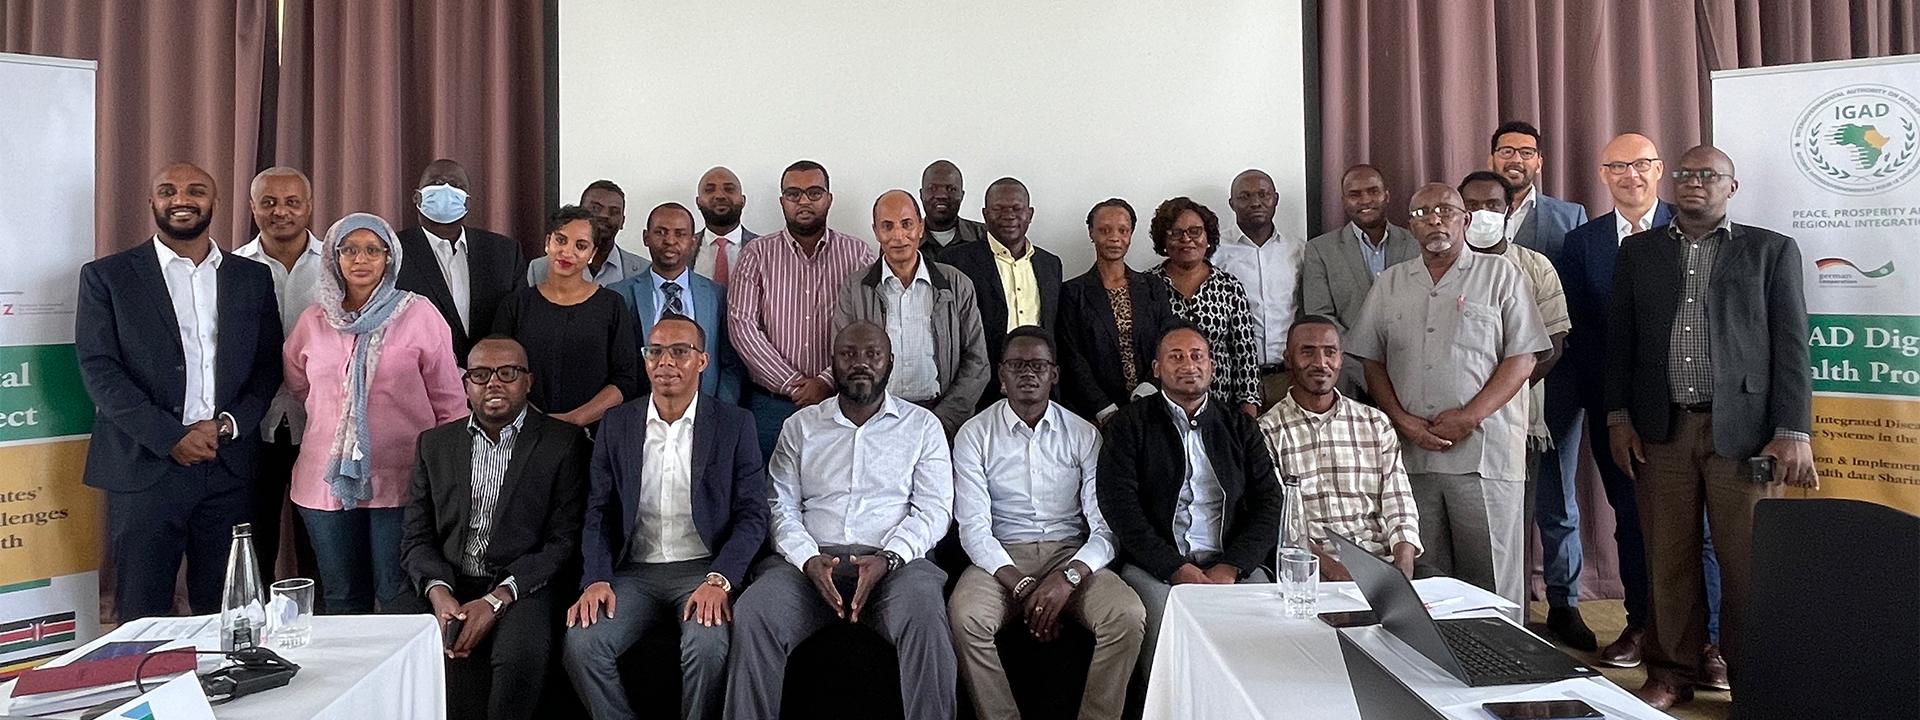 IGAD Health Management Information System Experts meet to bolster Regional Disease Surveillance for pandemic preparedness and response in the IGAD Region